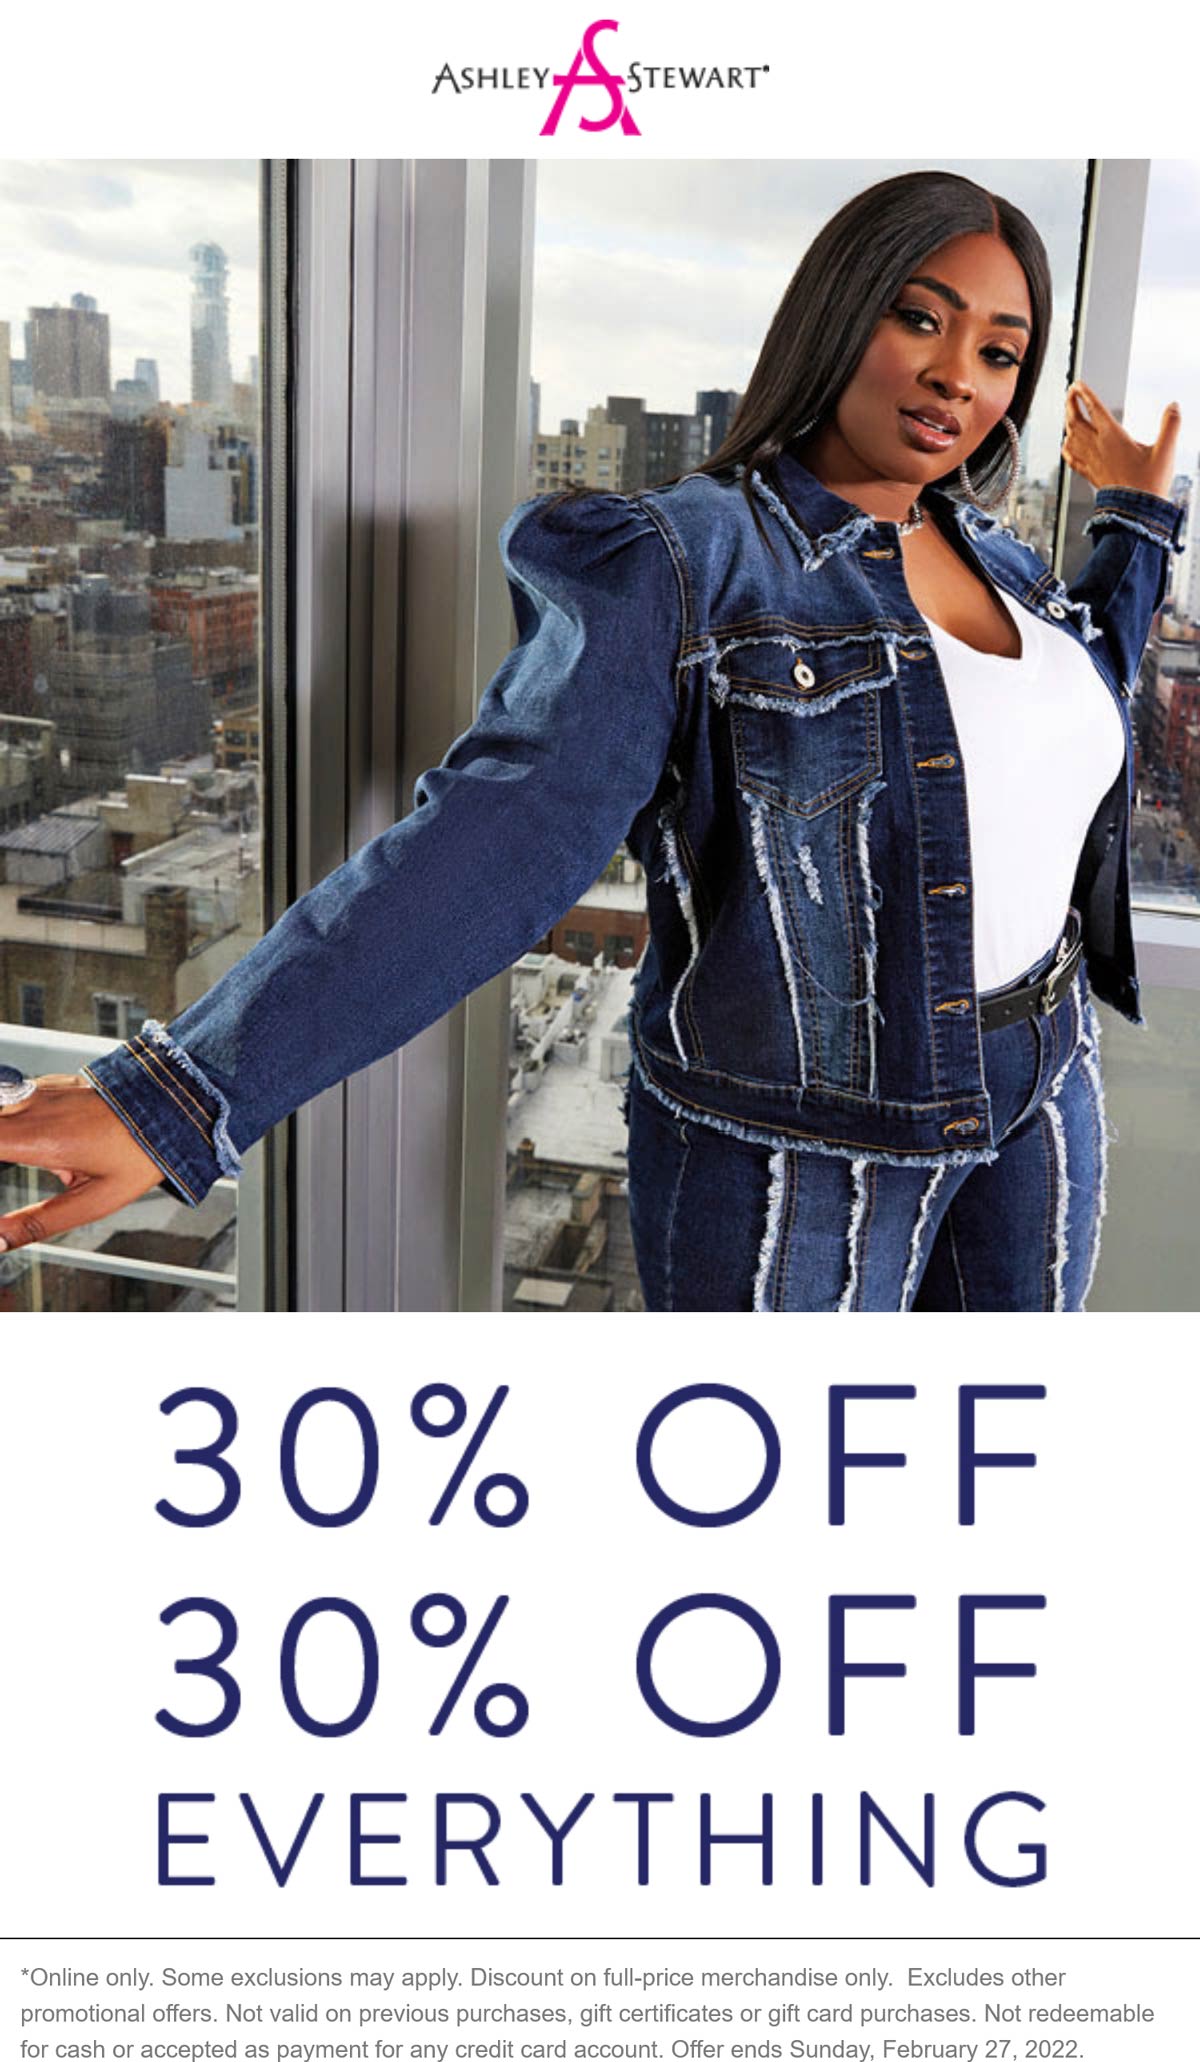 Ashley Stewart stores Coupon  30% off everything online today at Ashley Stewart #ashleystewart 